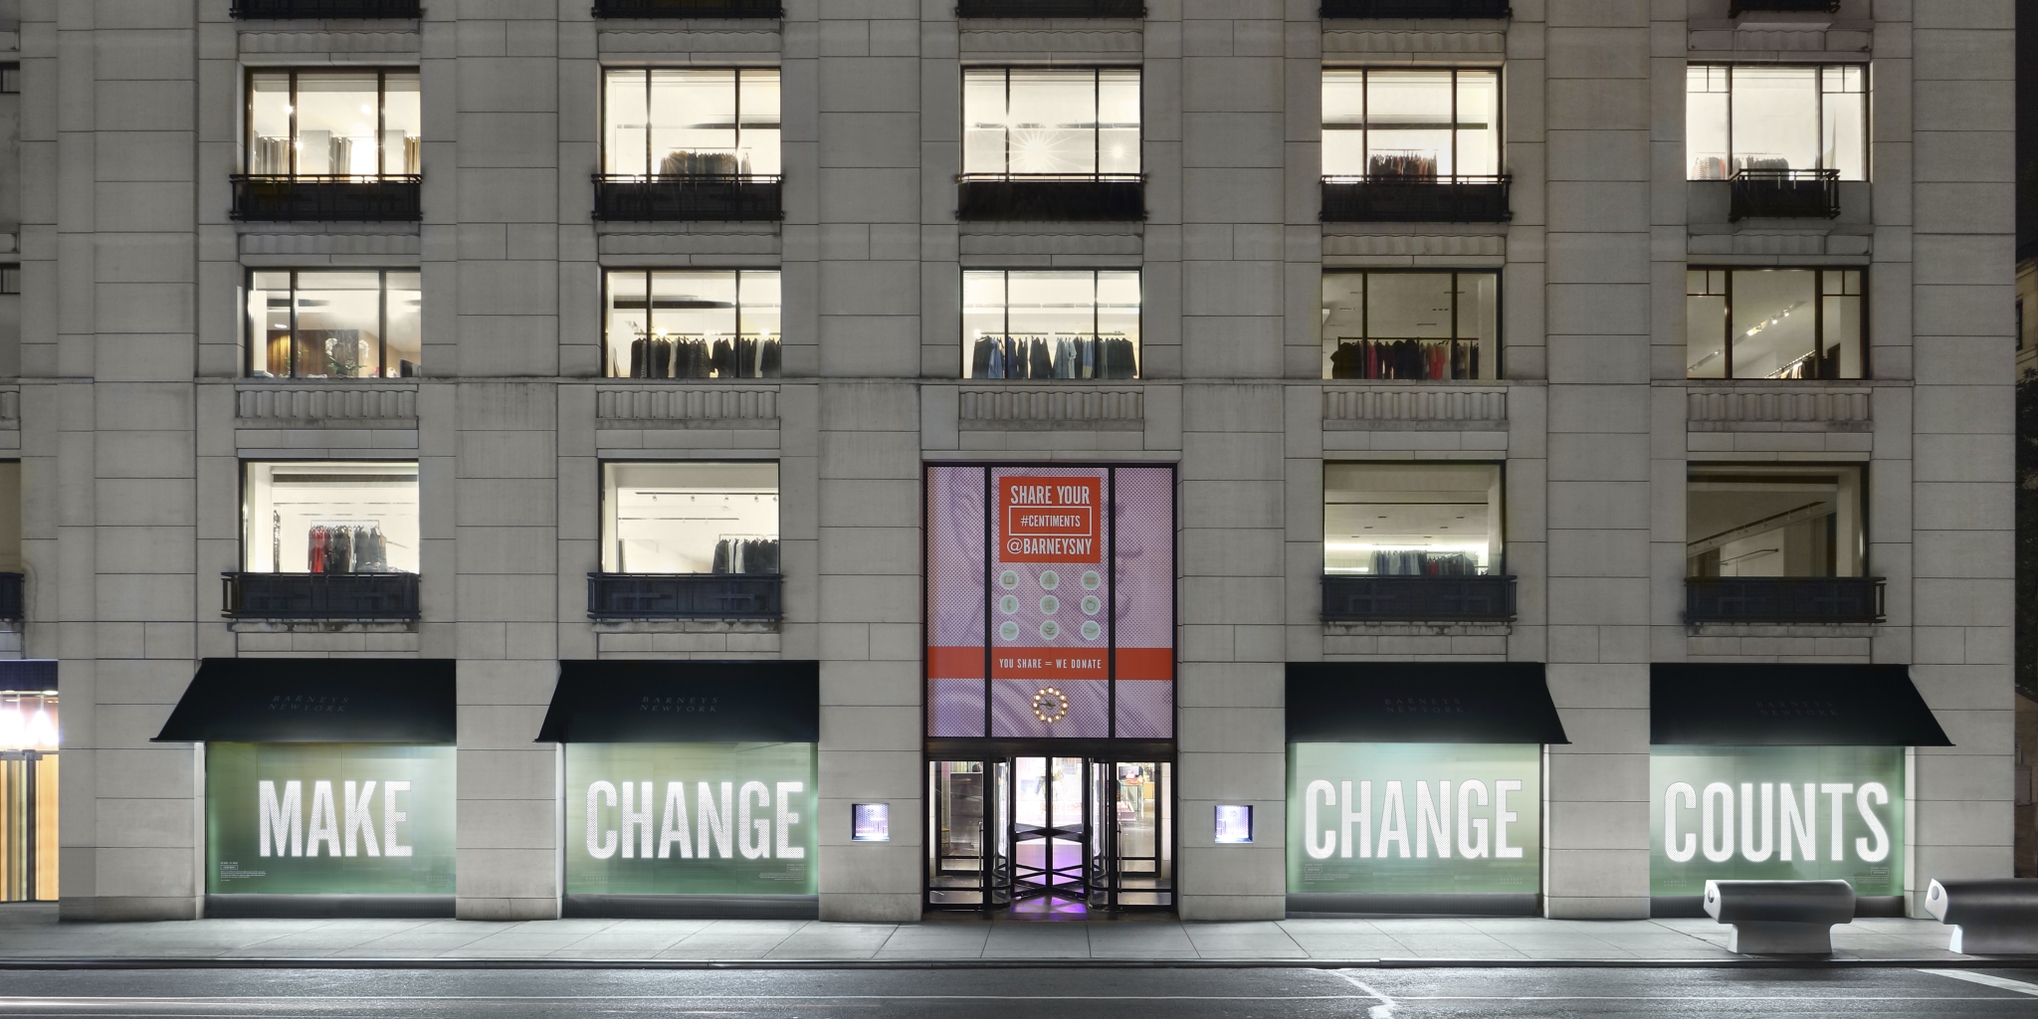 Save the Children partnered with Barneys New York on their 2018 holiday ‘Make Change’ campaign. By transforming sentiments into #centiments, consumers were reminded of the season’s guiding principles to not just give - but to give back. Photo credit: Save the Children 2019.